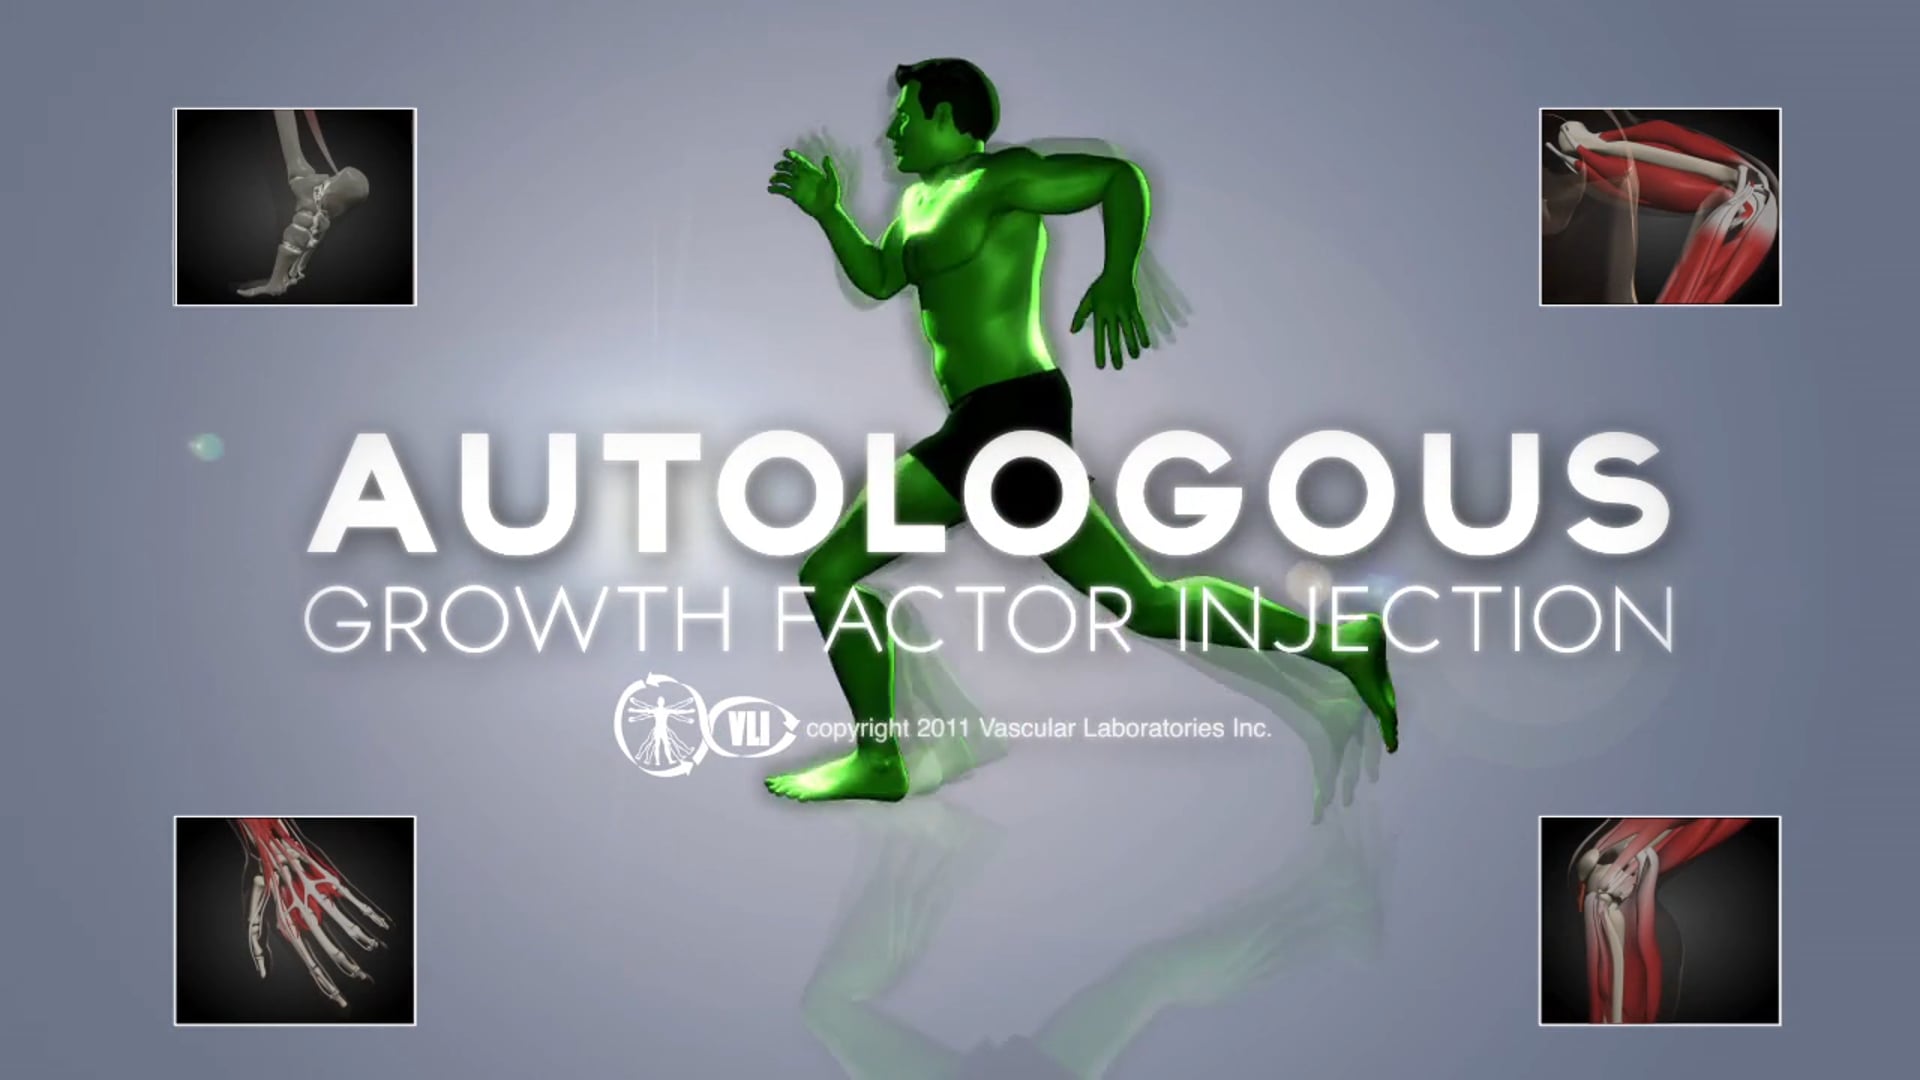 Autologous Growth Factor Injection (2010) Directed by Jose A. Acosta for VLI.